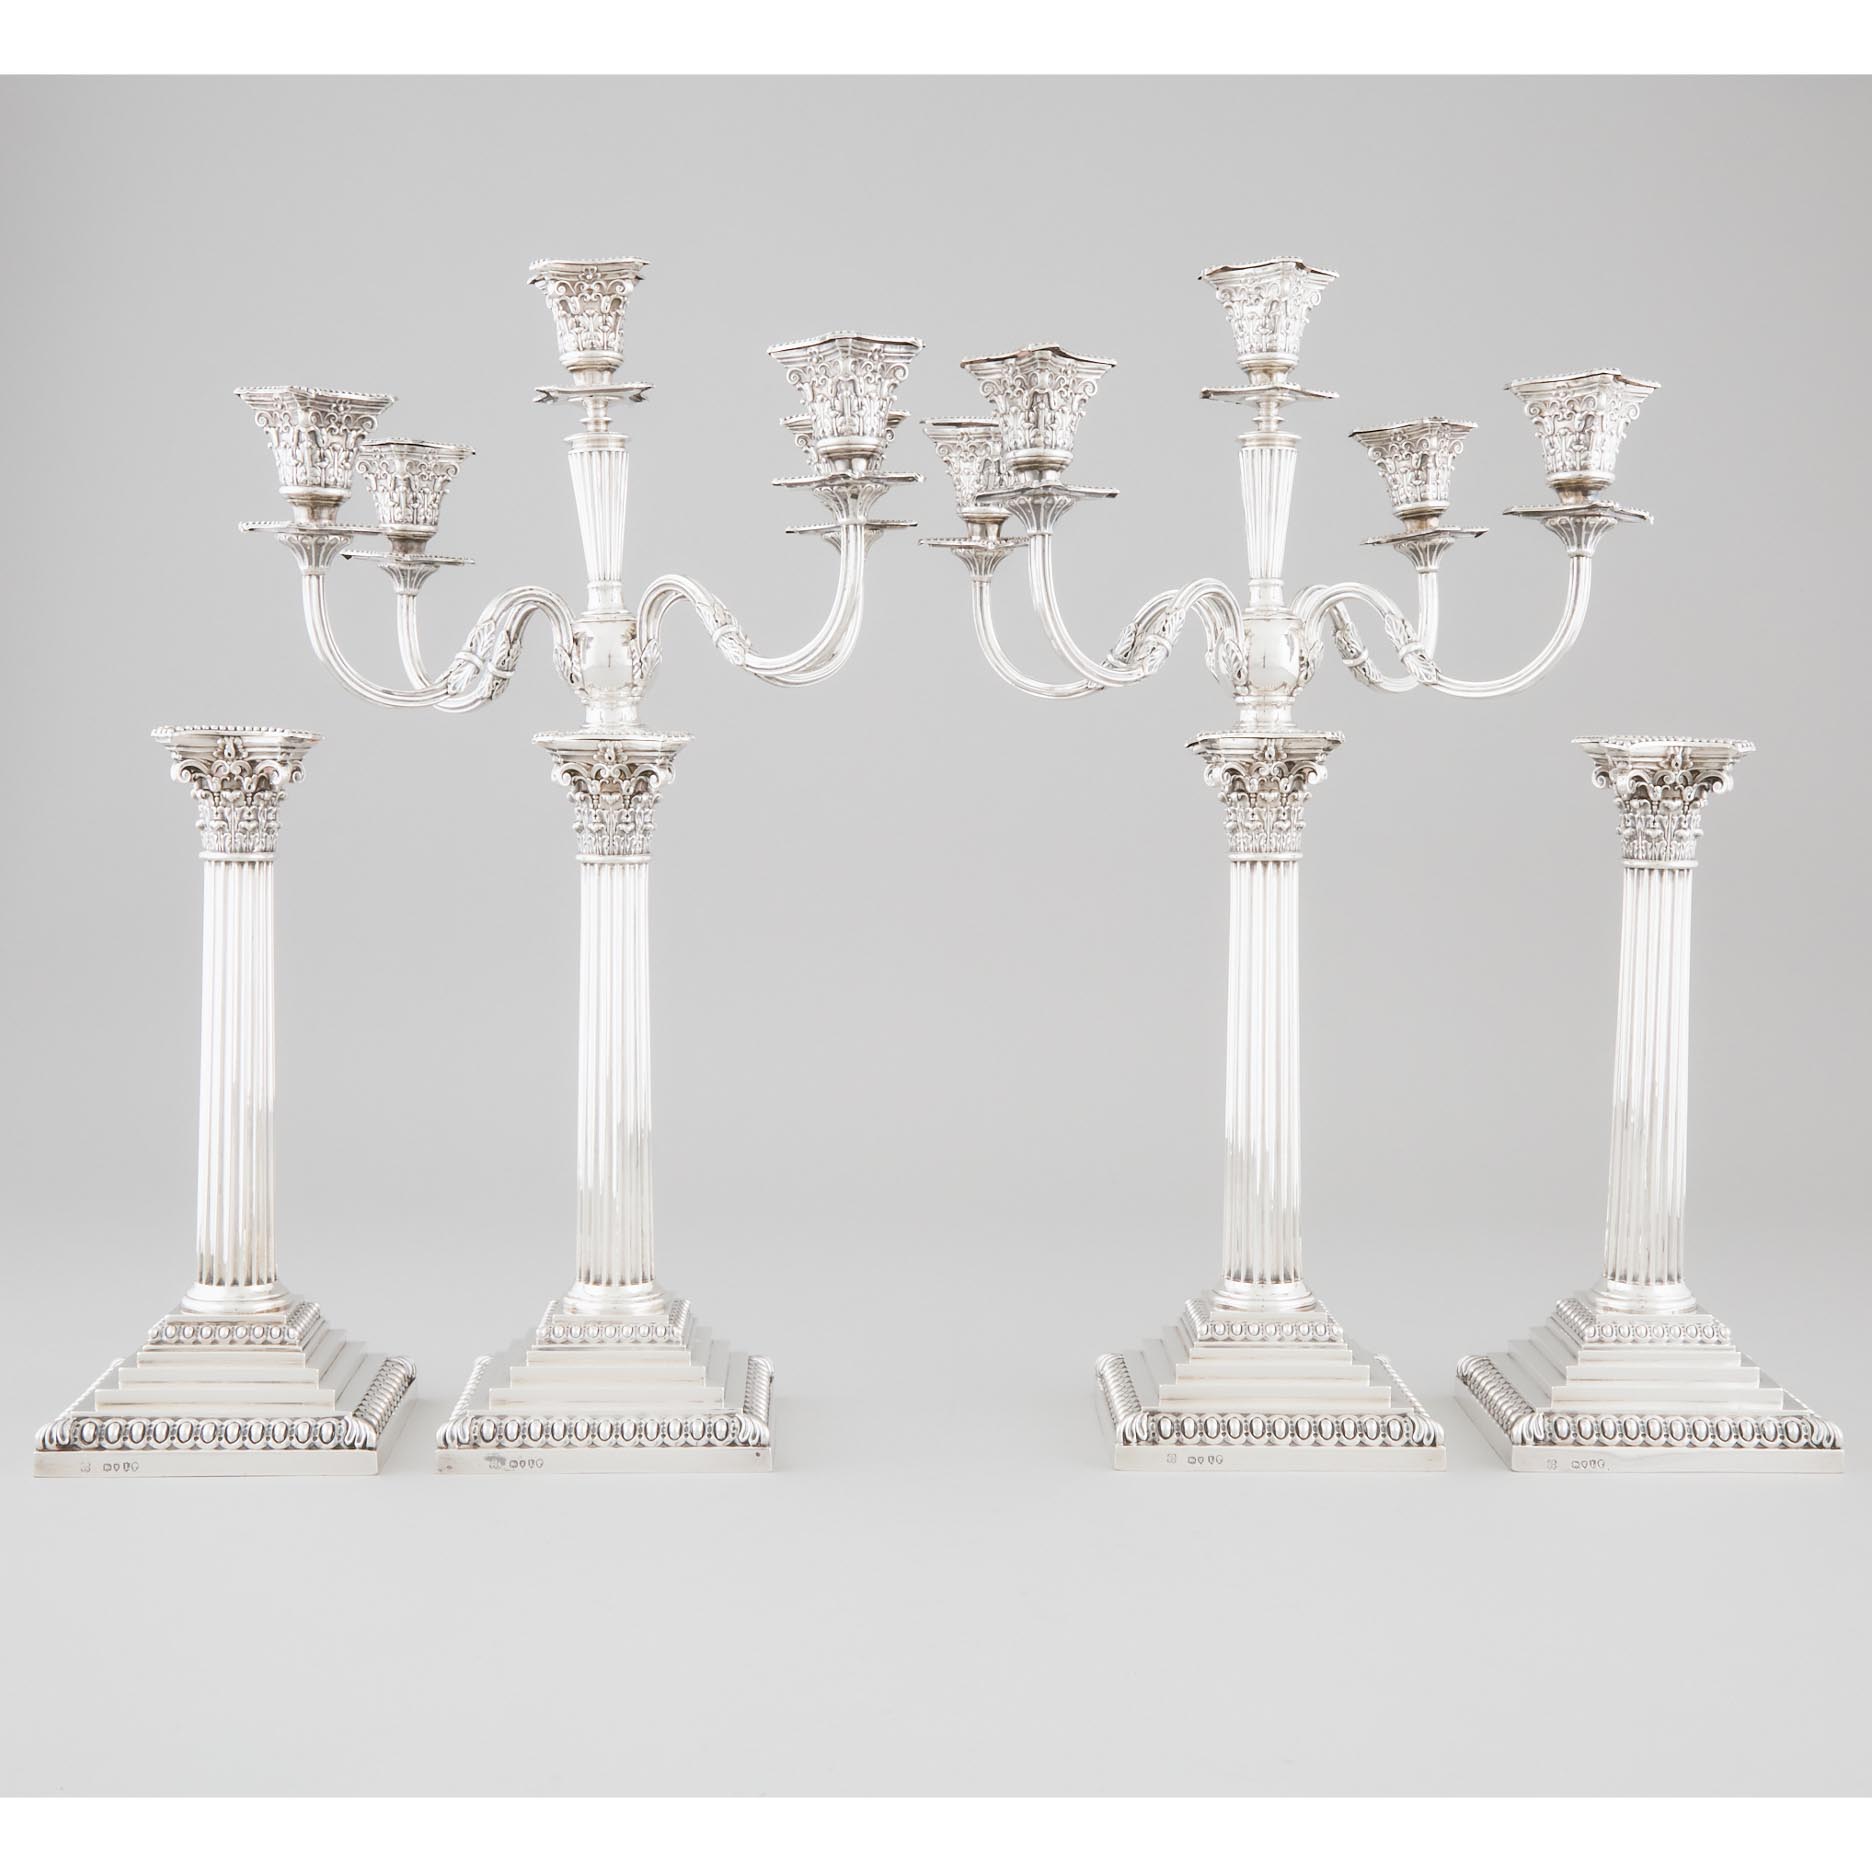 Set of Four Victorian Silver Corinthian Columnar Table Candlesticks with Two Five-Light Candelabra Branch Sections, John Aldwinckle & Thomas Slater, London, 1886